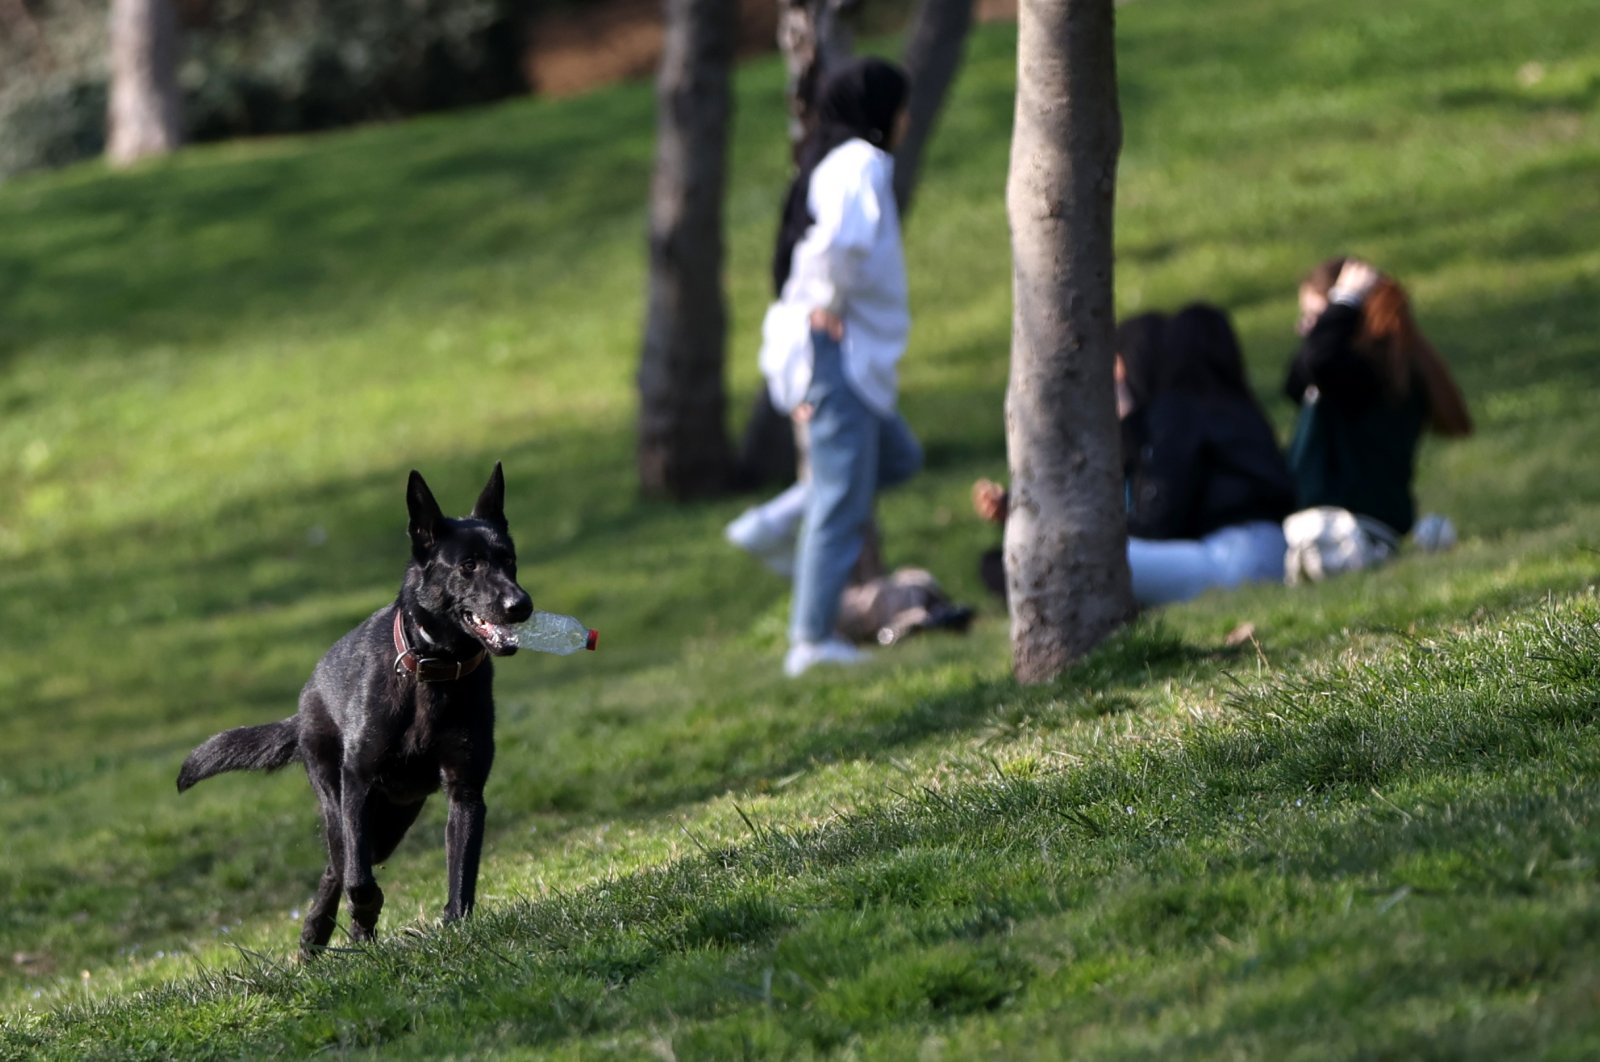 Raven runs in a park with a plastic bottle in its mouth, in Istanbul, Turkey, April 1, 2022. (AA PHOTO)